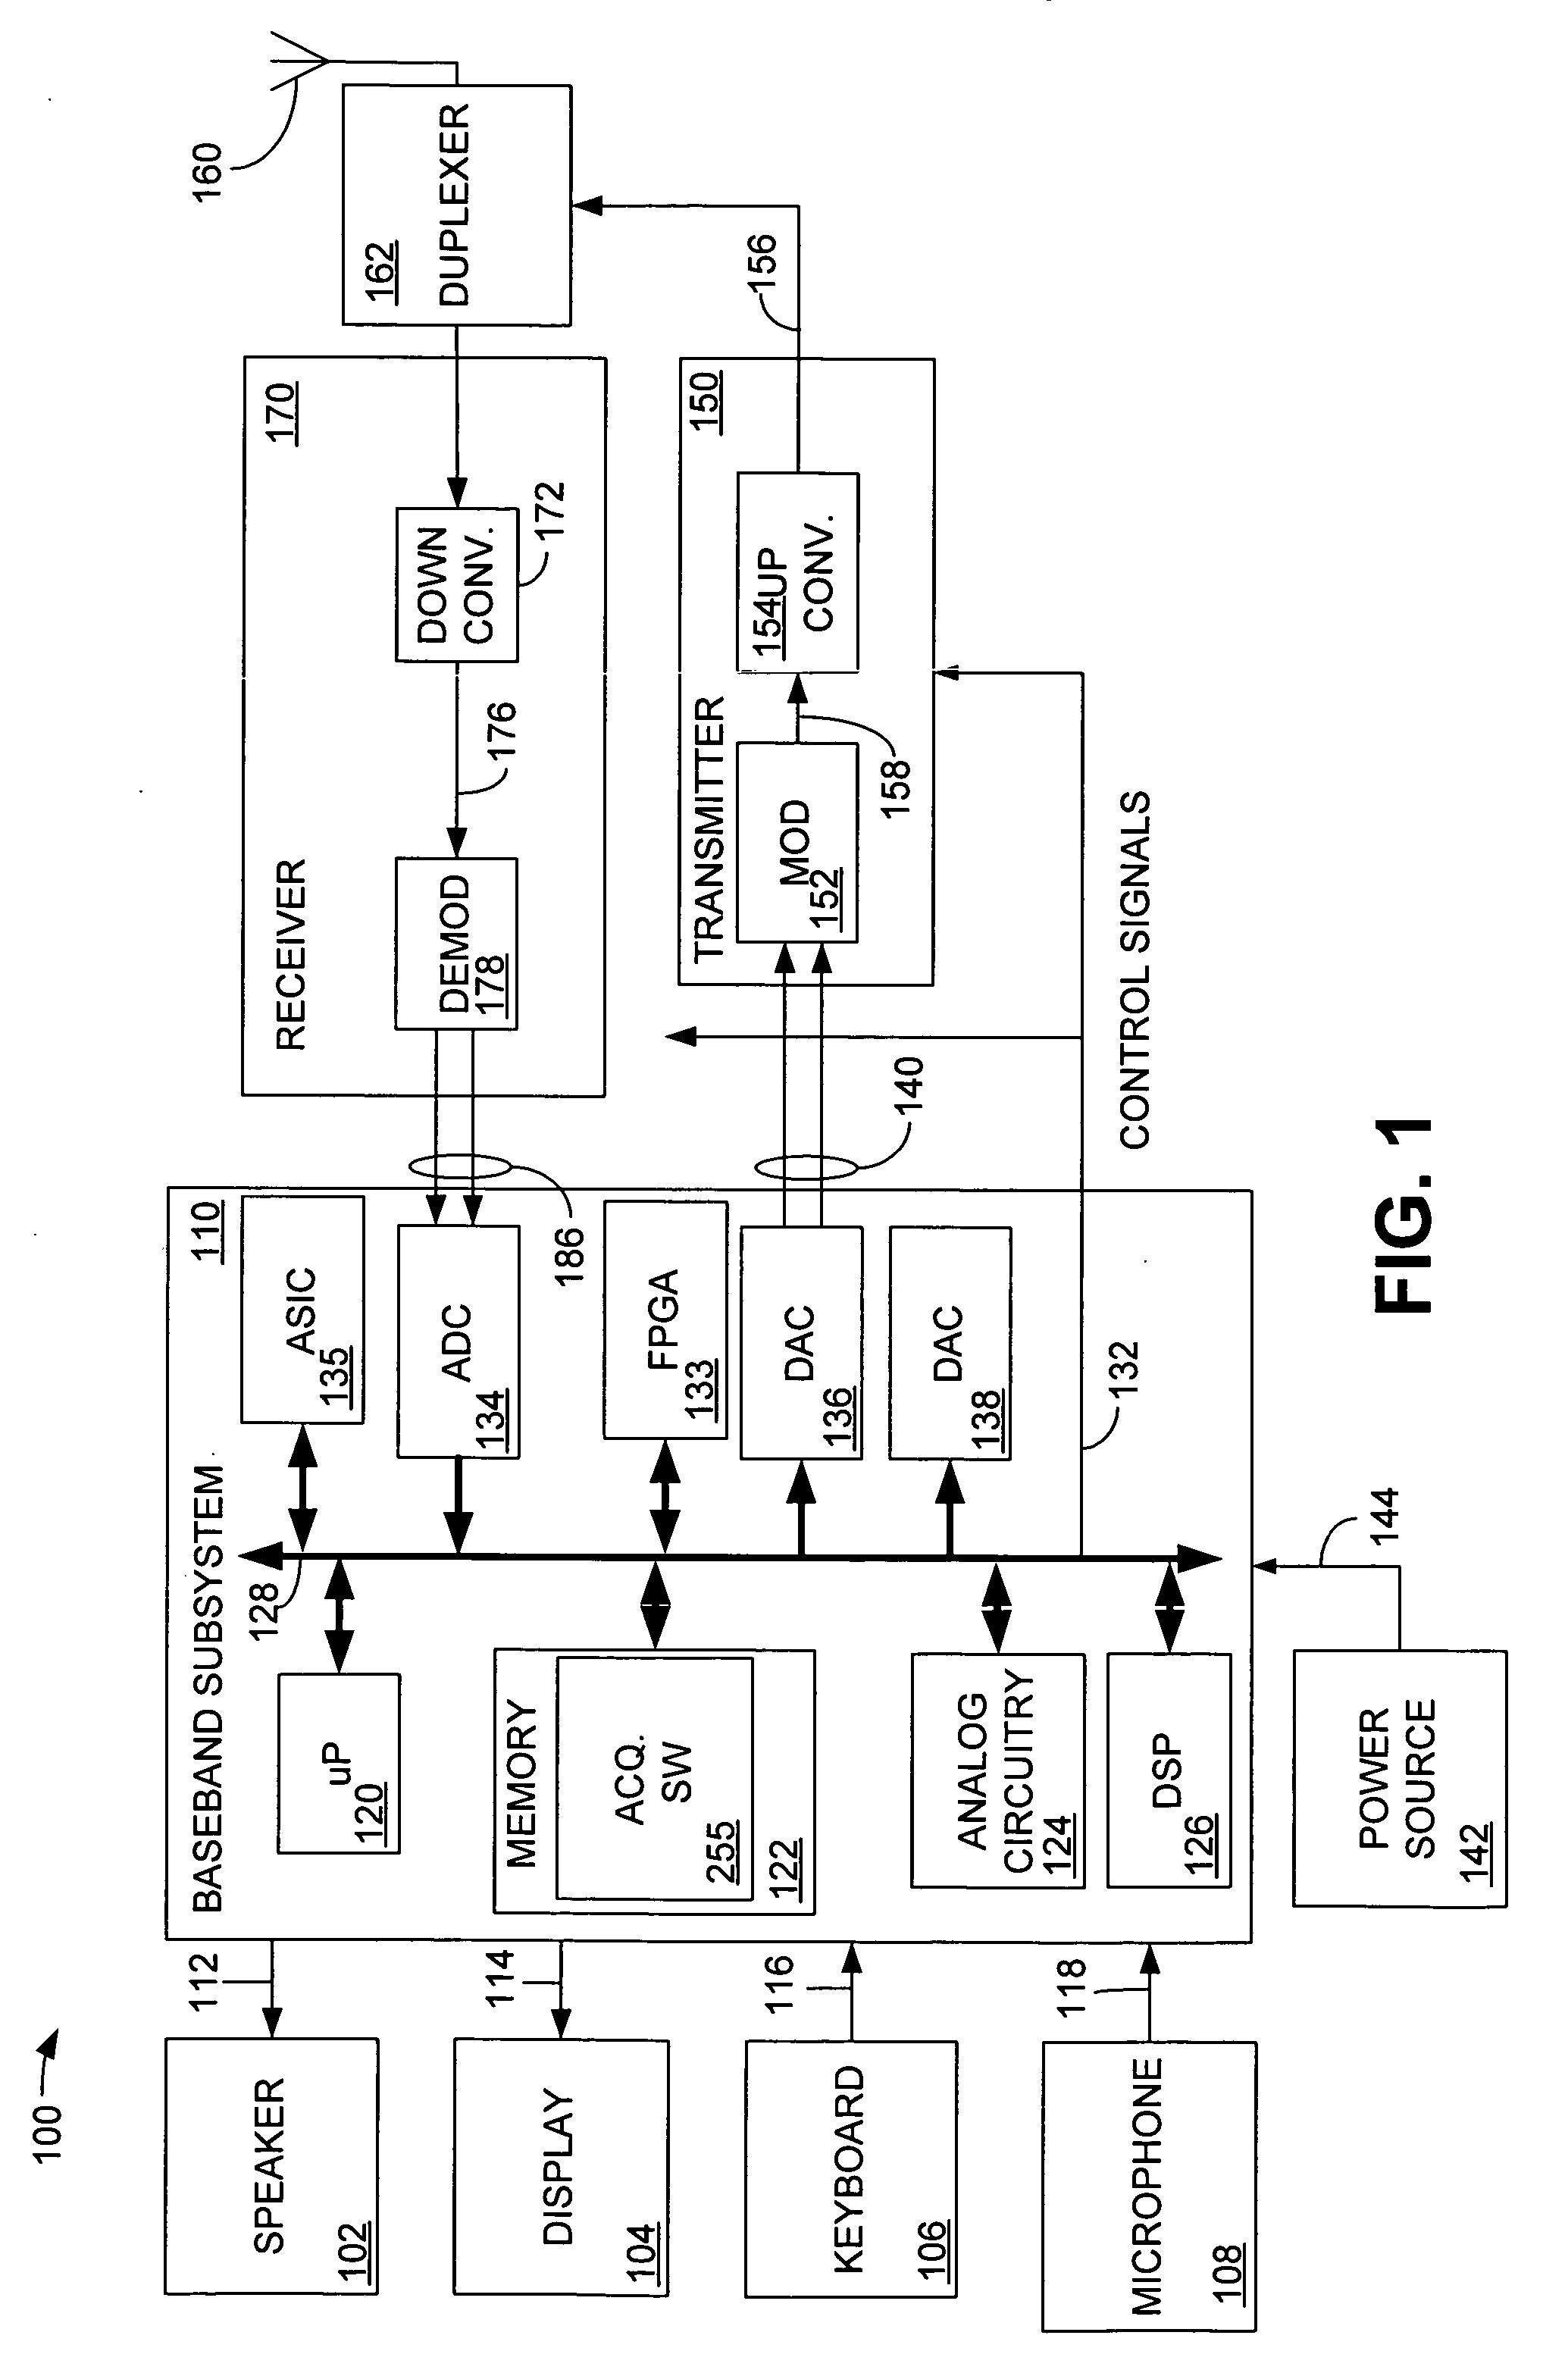 Multiple simultaneous frequency and code acquisition for a code division multiple access (CDMA) communication system